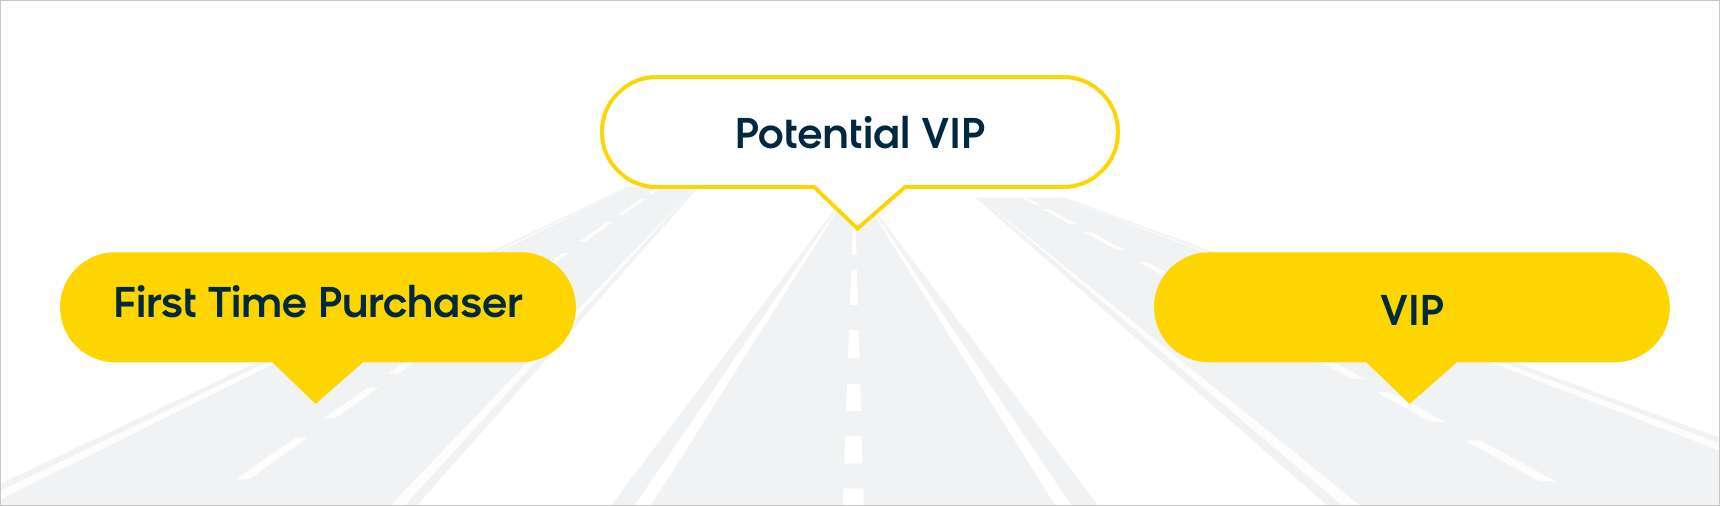 Identifying potential VIPs can help you segment customers to maximize customer lifetime value.